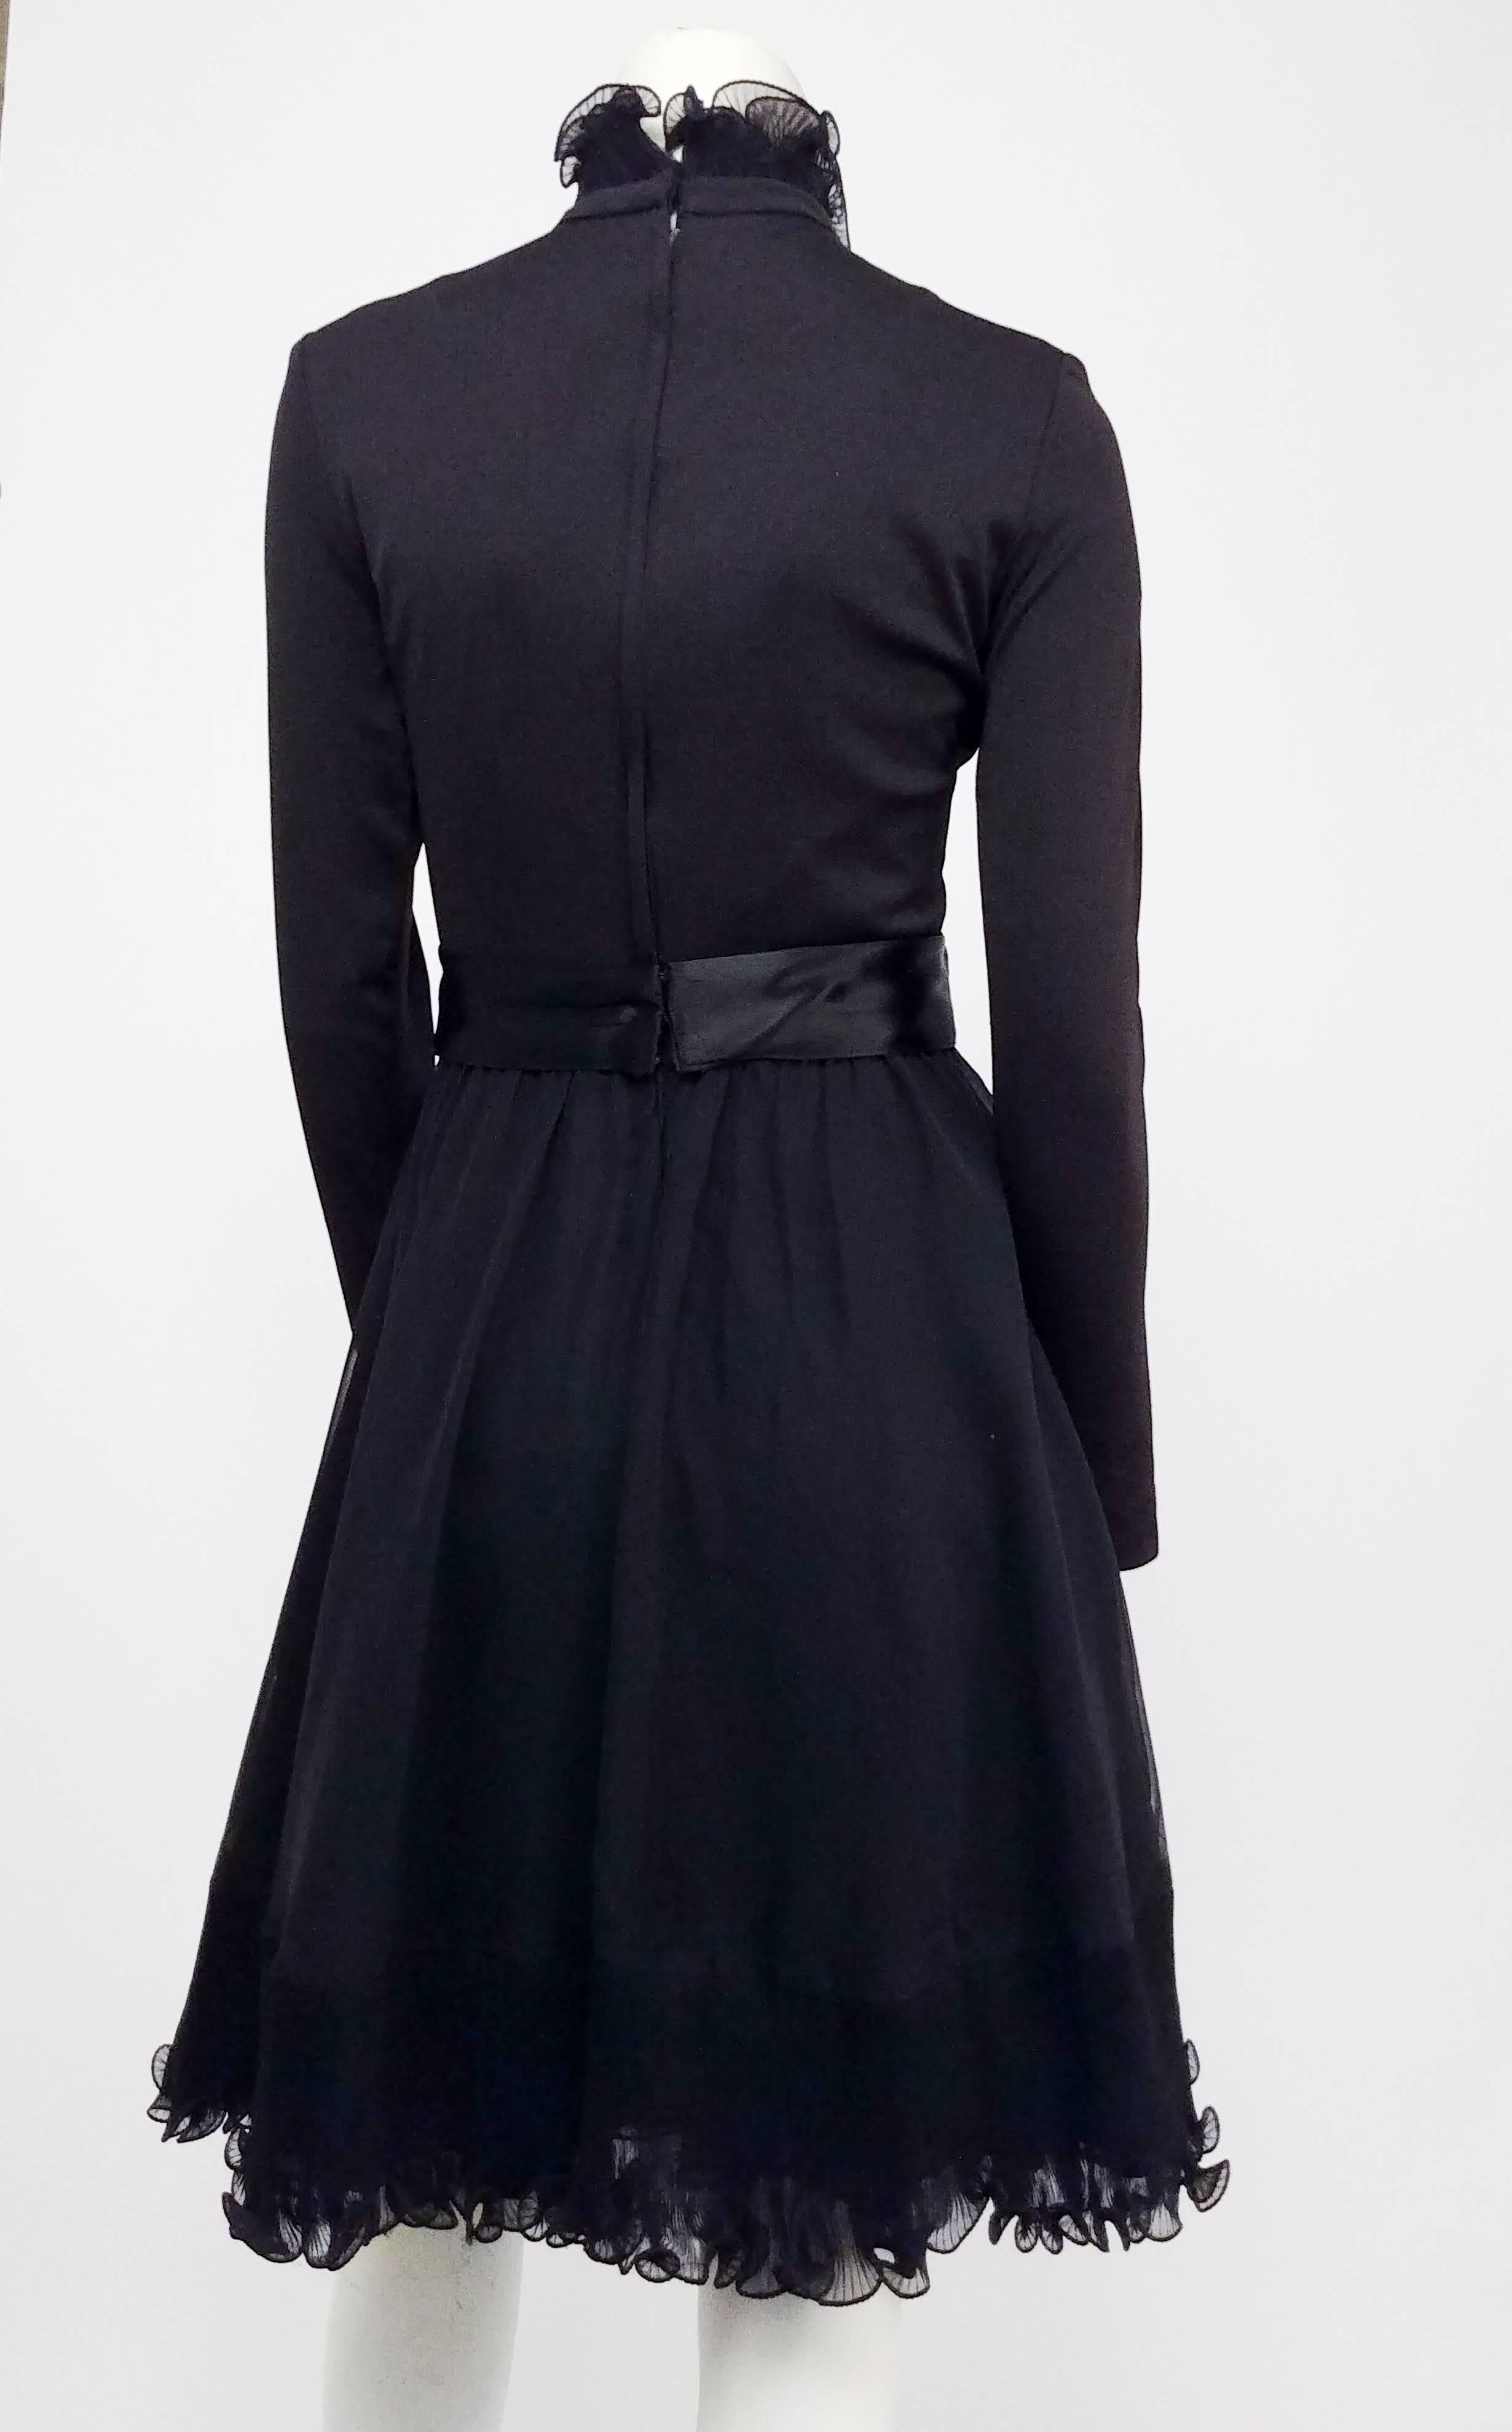 Miss. Magnin Black Cocktail Dress w/ Ruffled Skirt, 1960s In Good Condition For Sale In San Francisco, CA